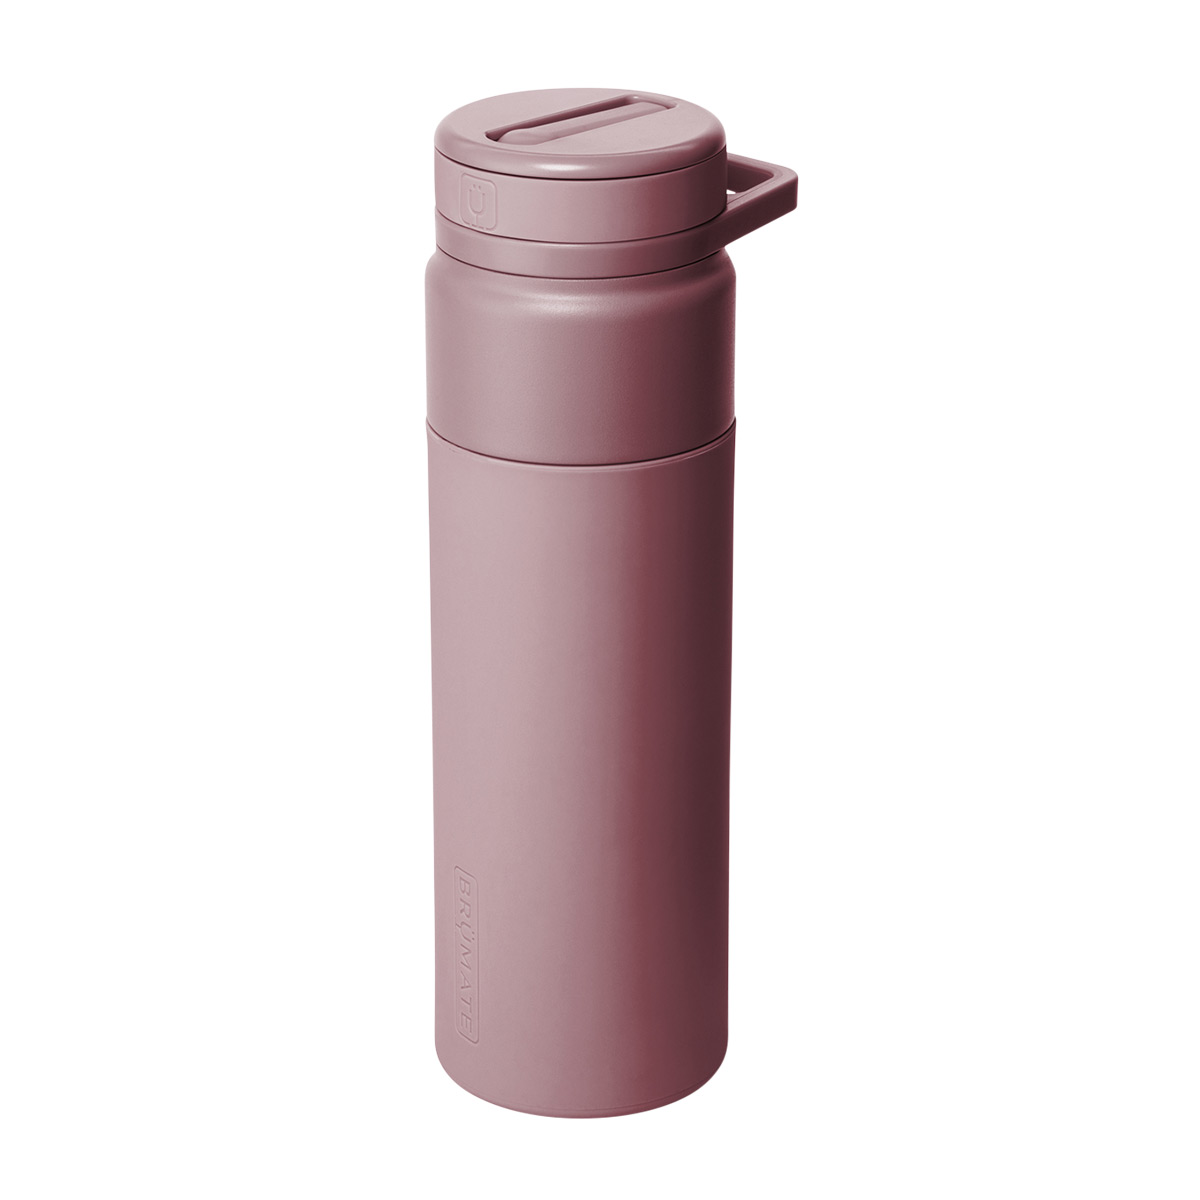 https://www.containerstore.com/catalogimages/487285/10094314-rotera-25-rose-taupe-ven.jpg